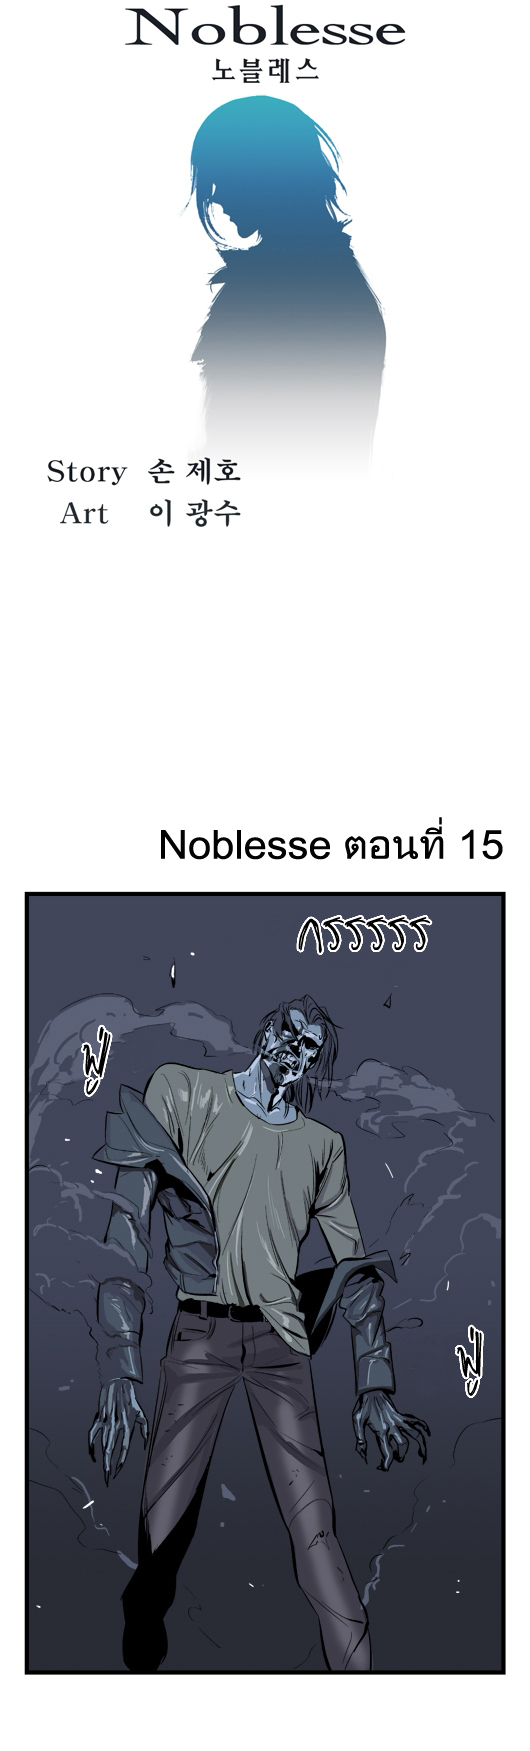 Noblesse 15 003